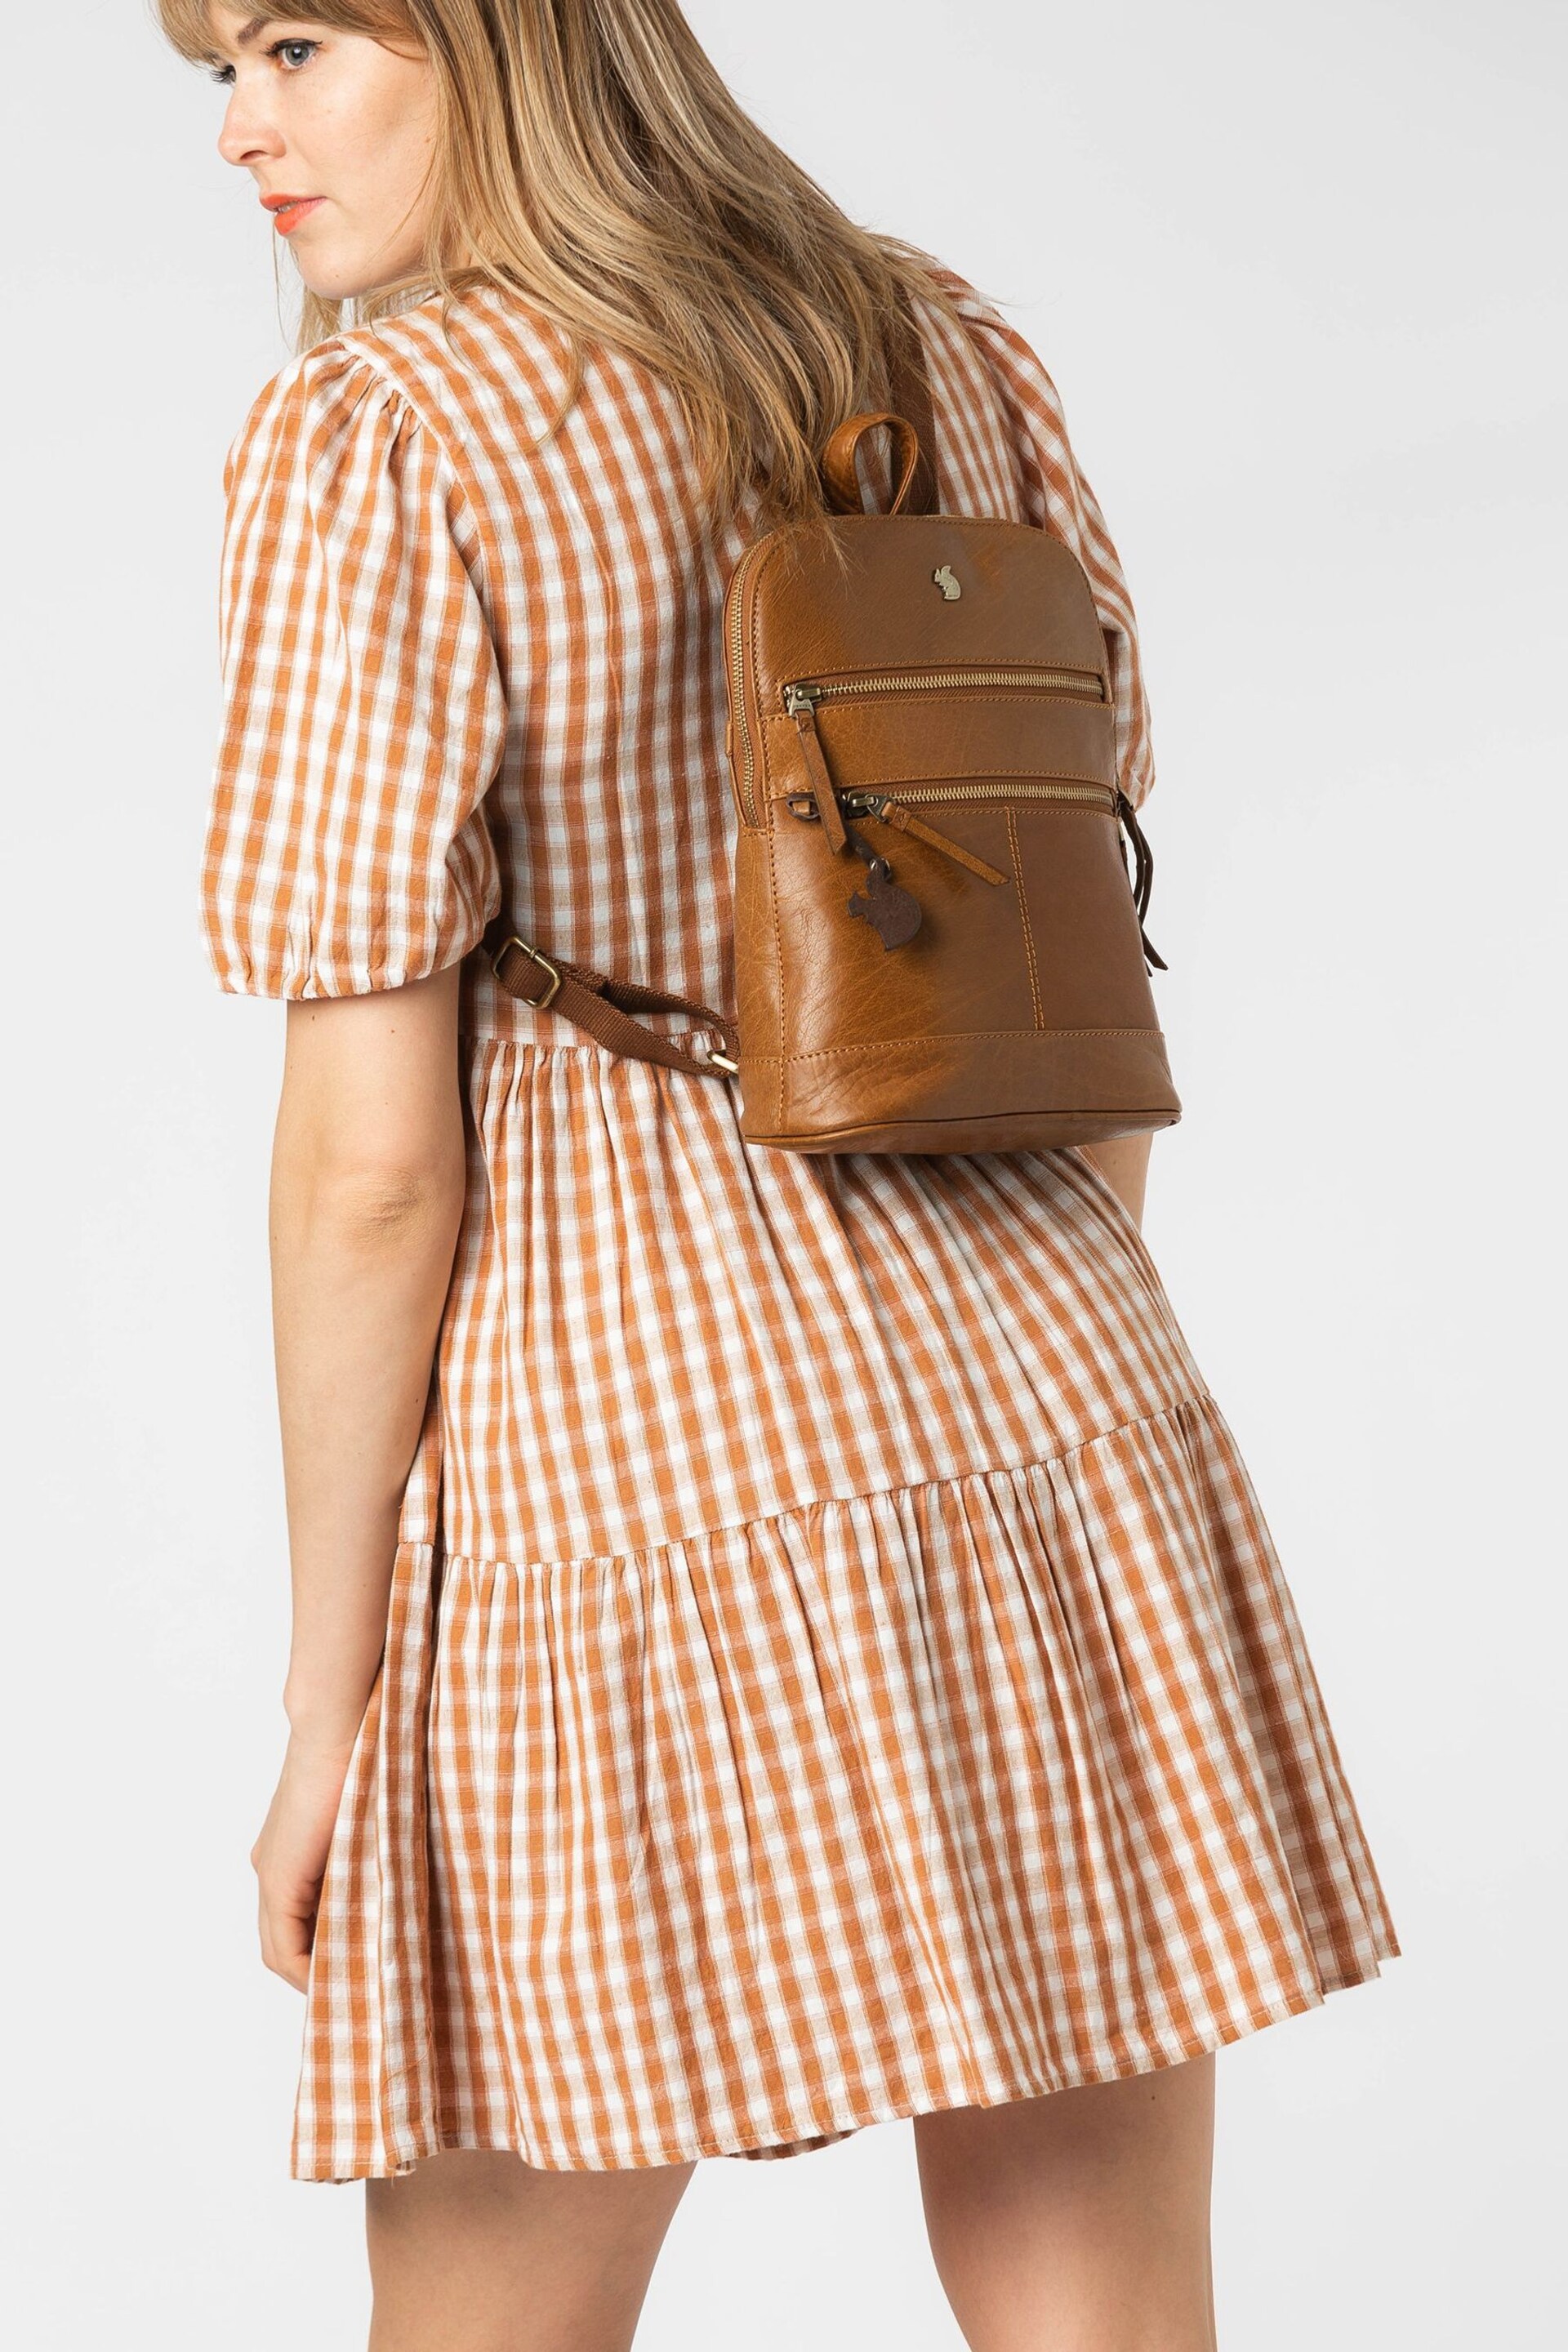 Conkca Francisca Leather Backpack - Image 1 of 6